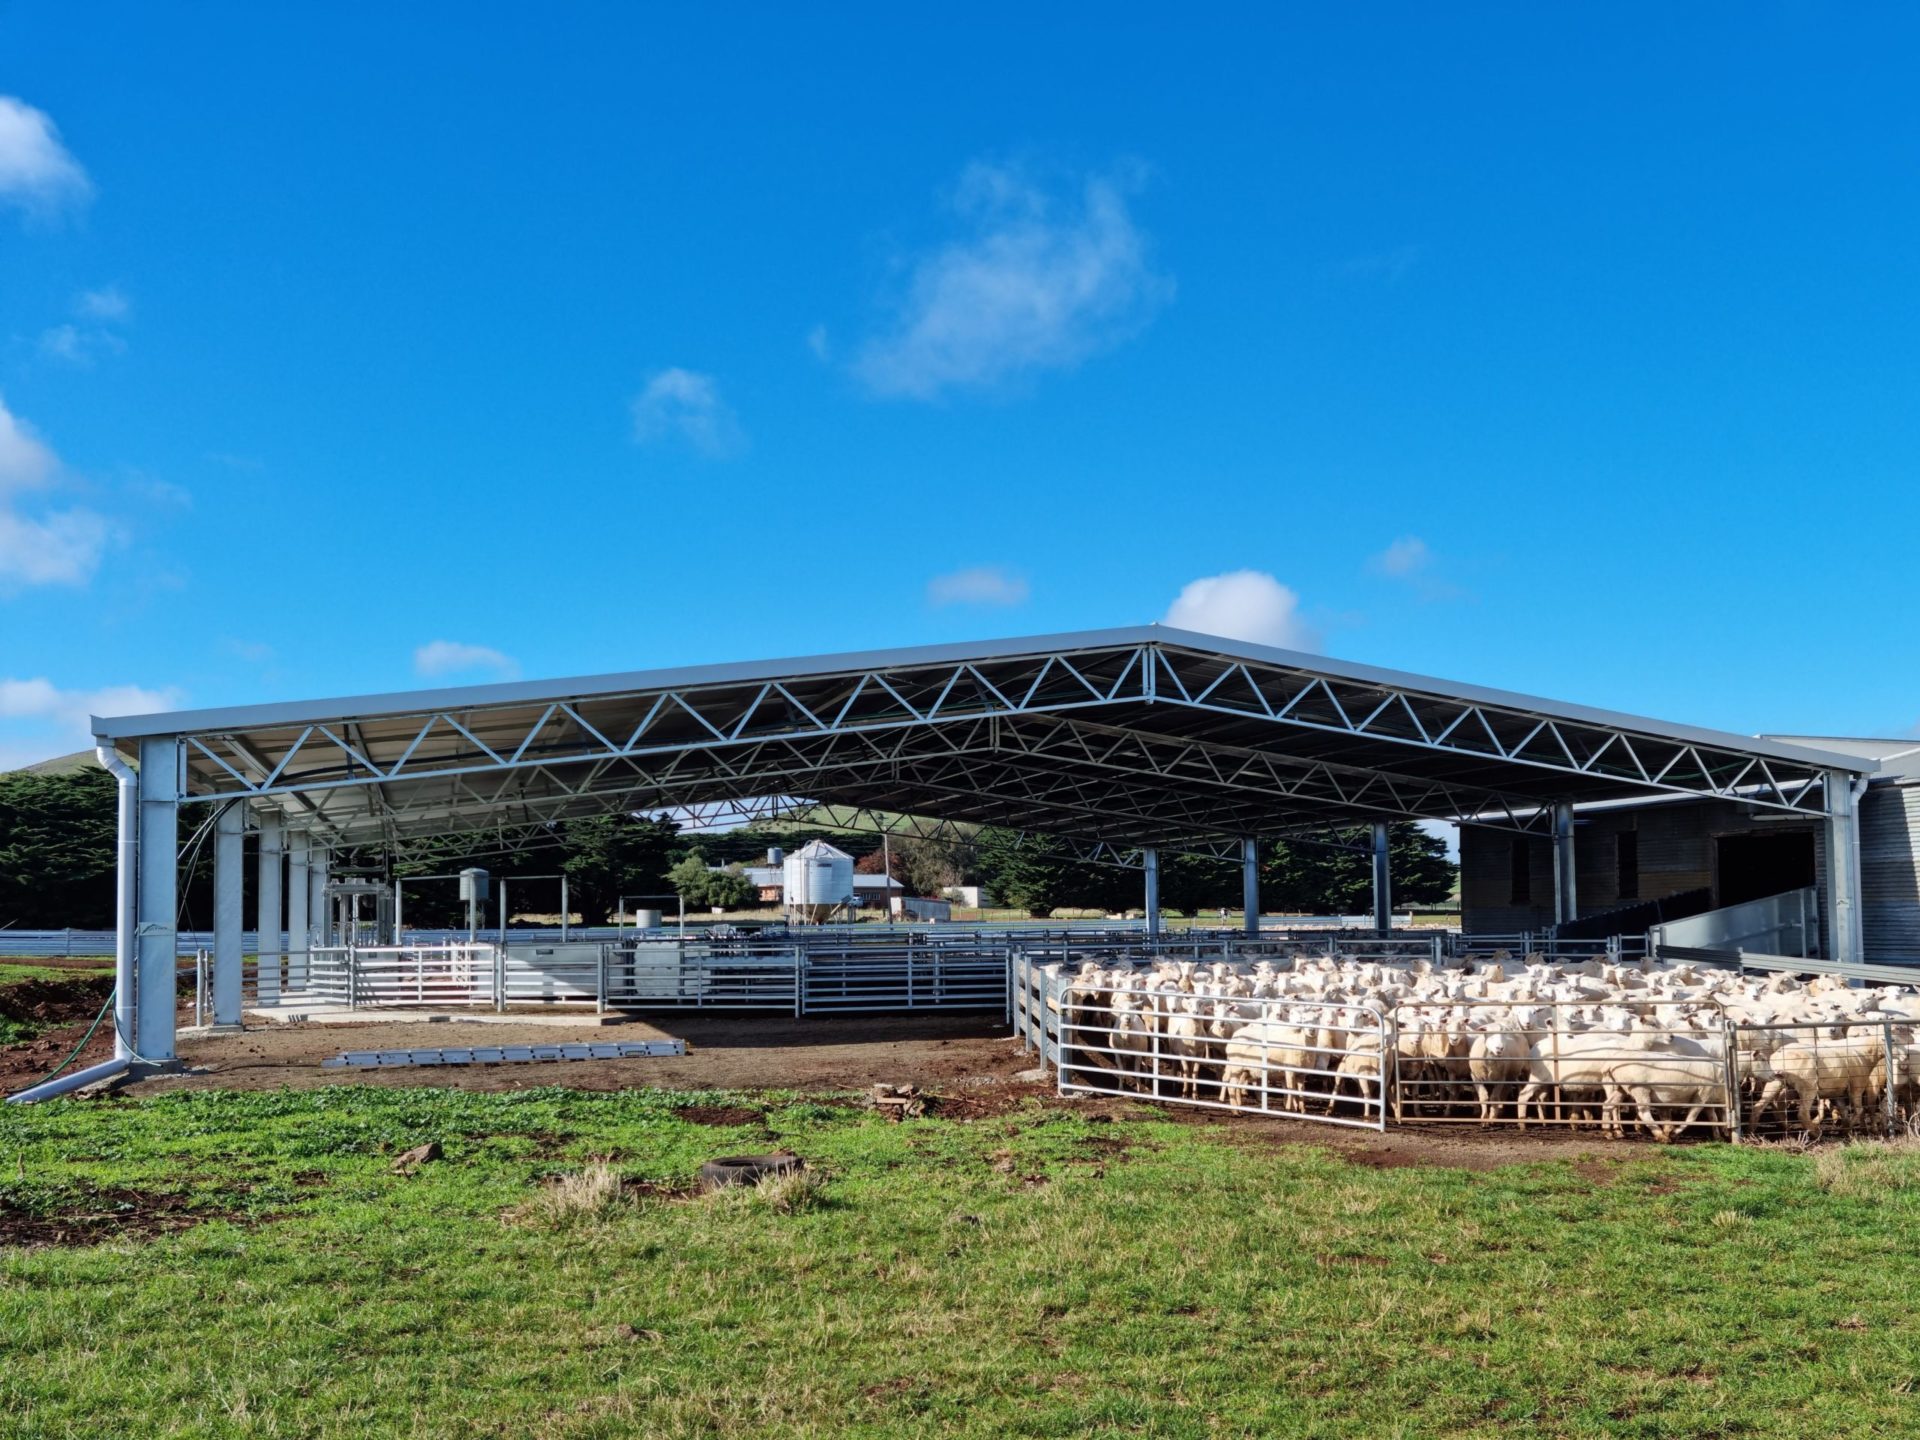 You are currently viewing 28m x 24m x 3.6m sheep yard cover